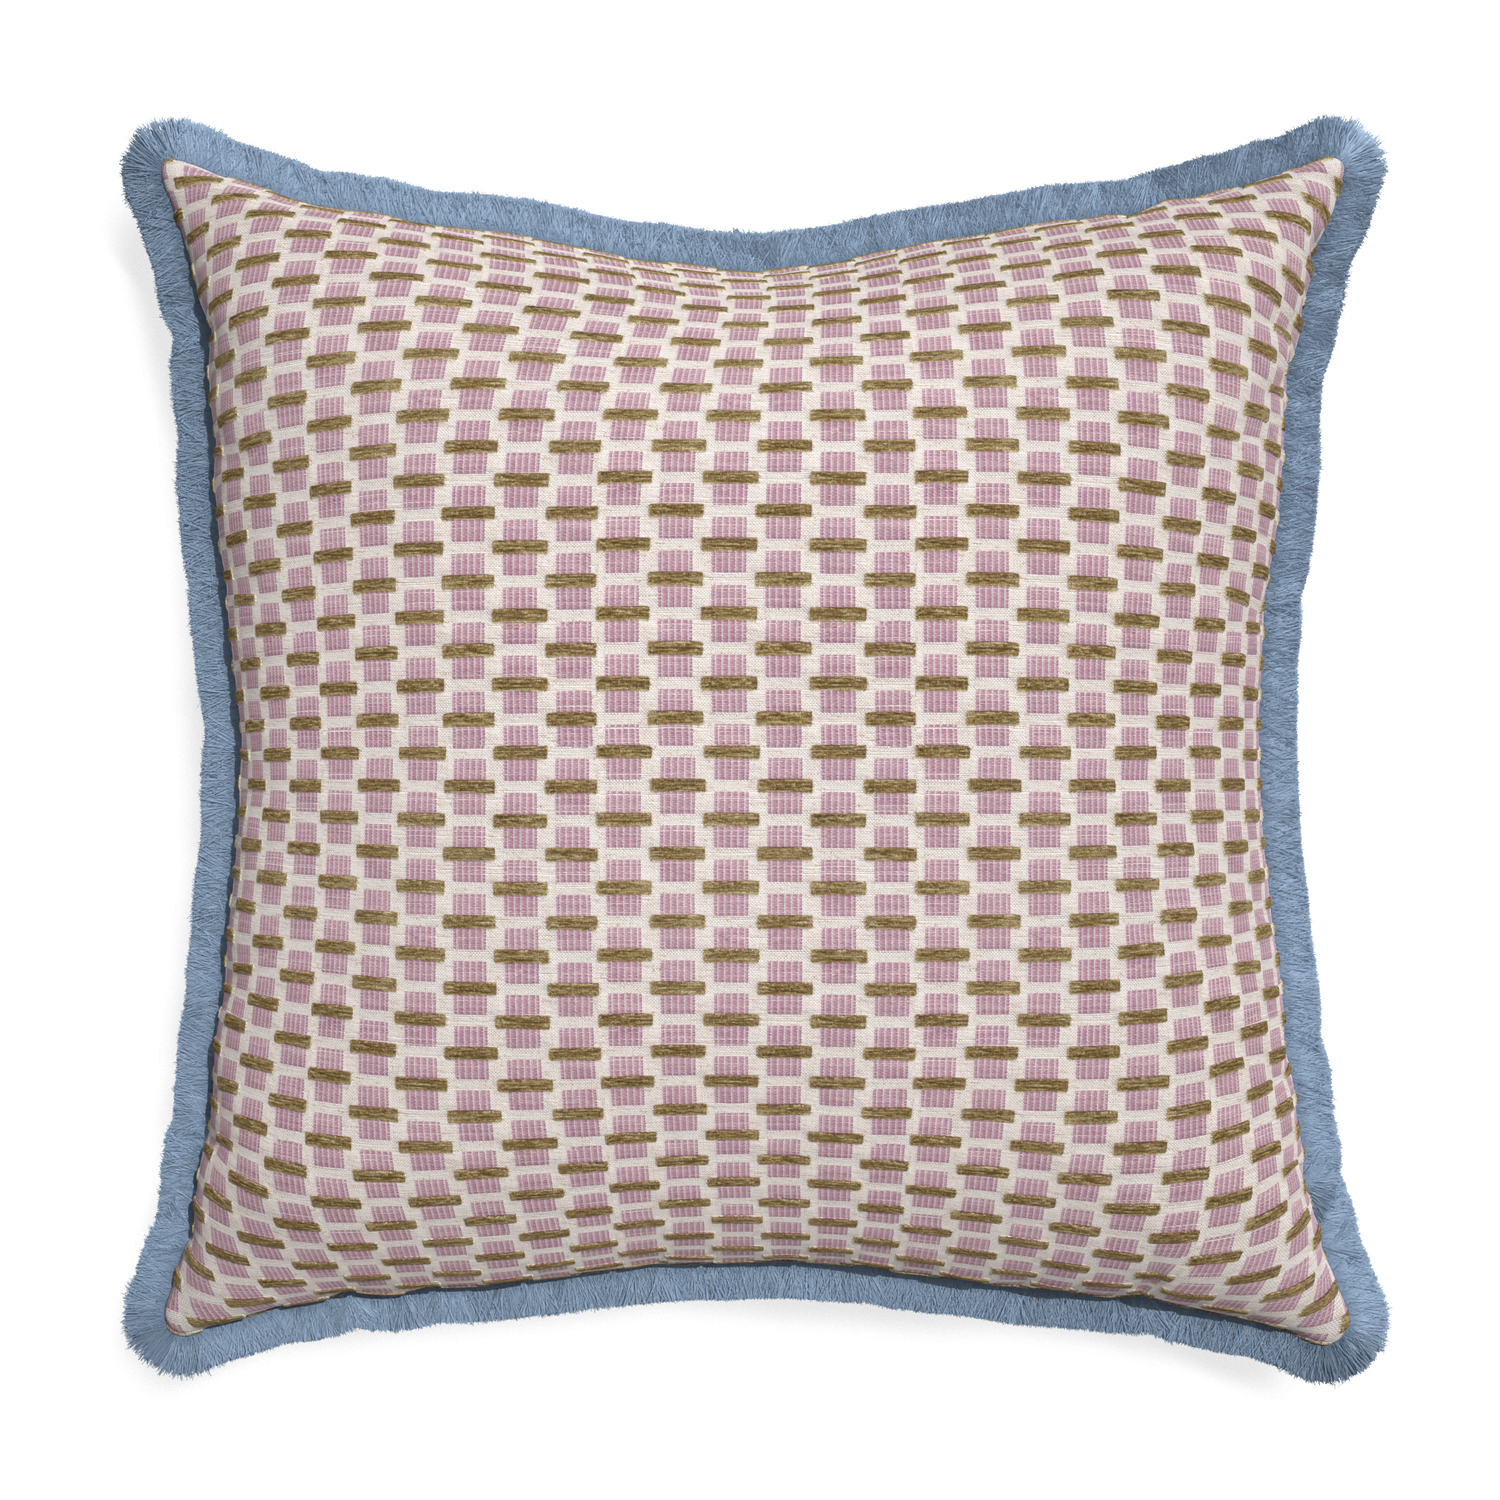 woven pink chenille jacquard pillow with sky blue fringe